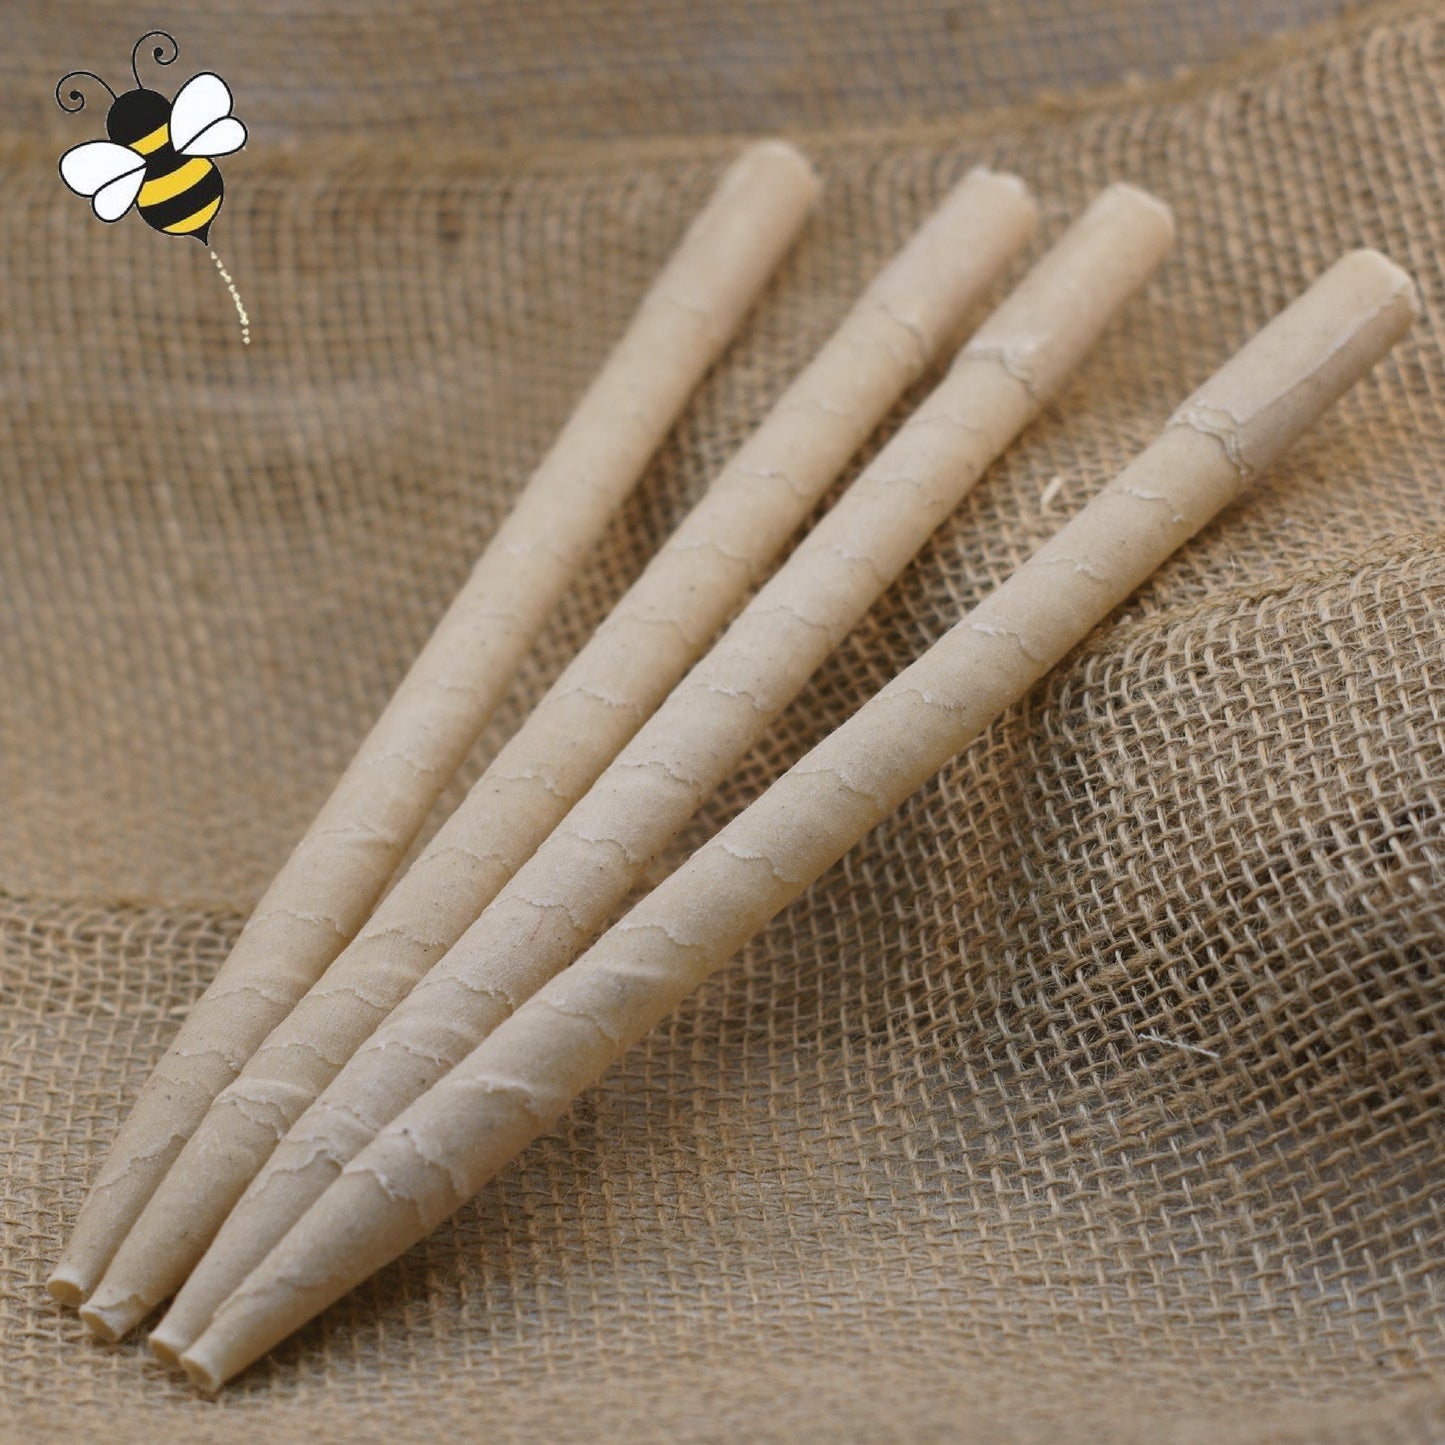 Ear Candles 100% Beeswax - All Natural No Additives - Made in the USA